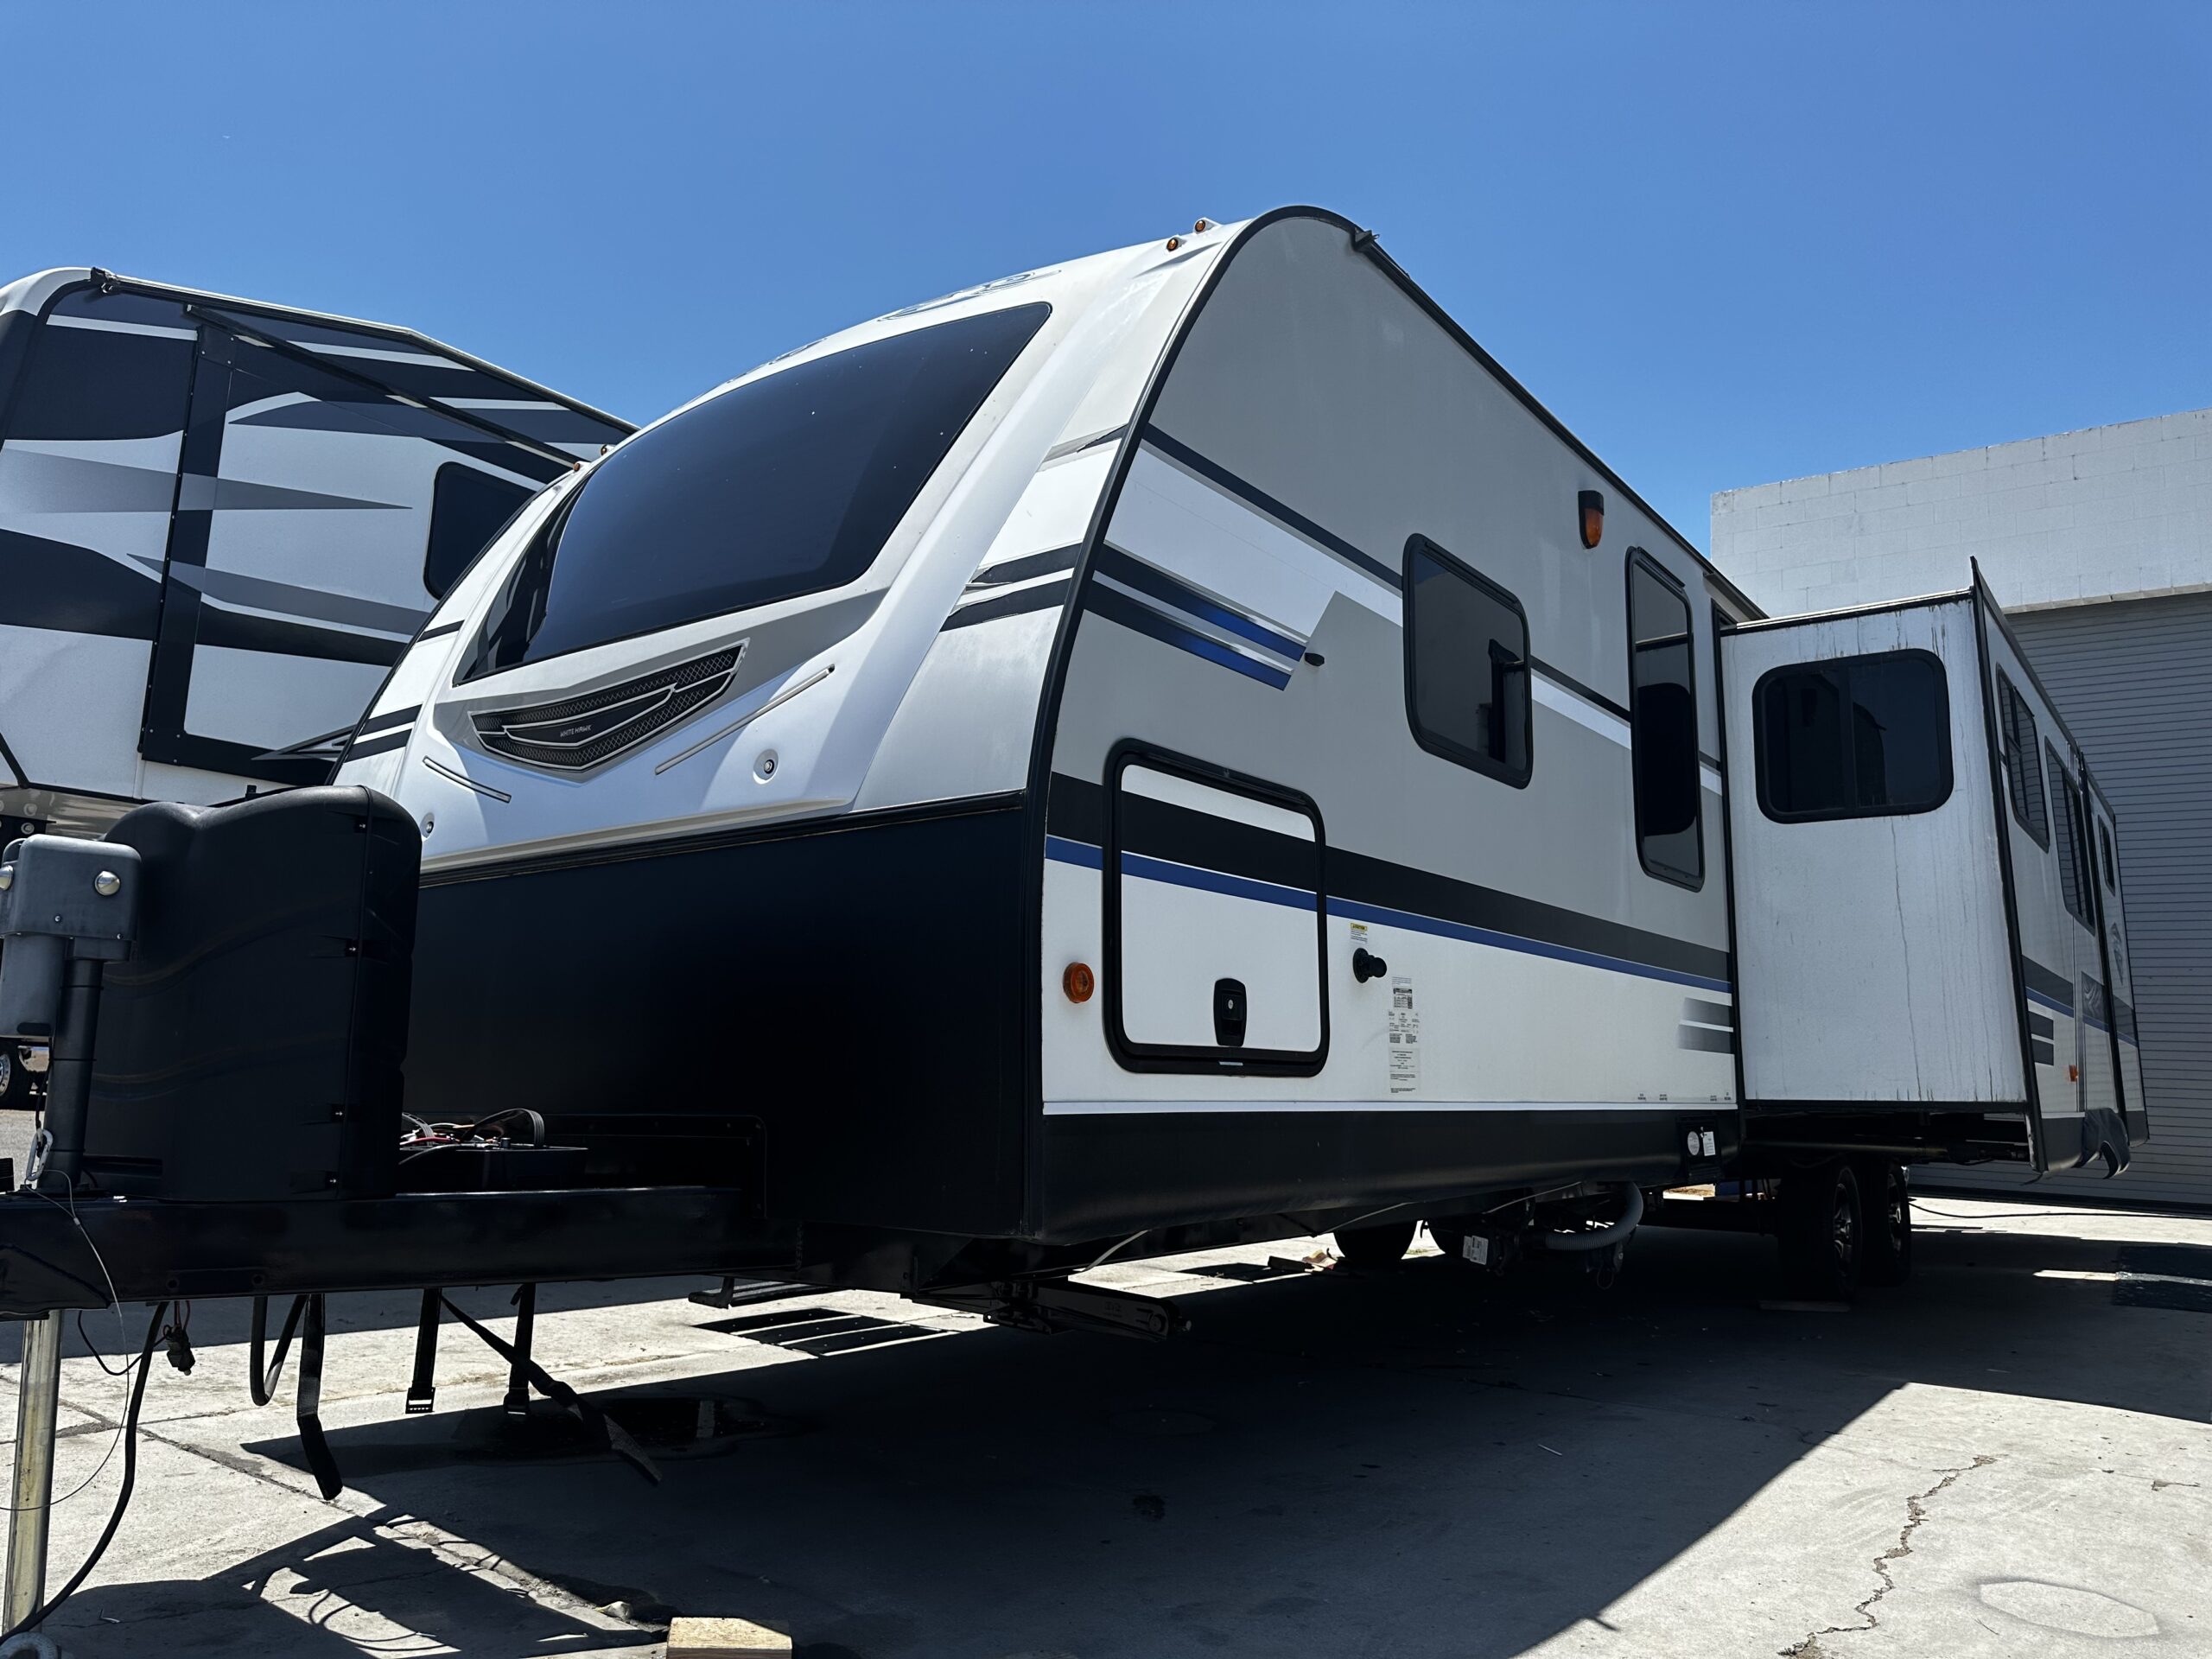 *SOLD* 2018 Jayco Whitehawk 31BH – BUNKHOUSE – 2 Slide Outs – Sleeps 10 – $29,950